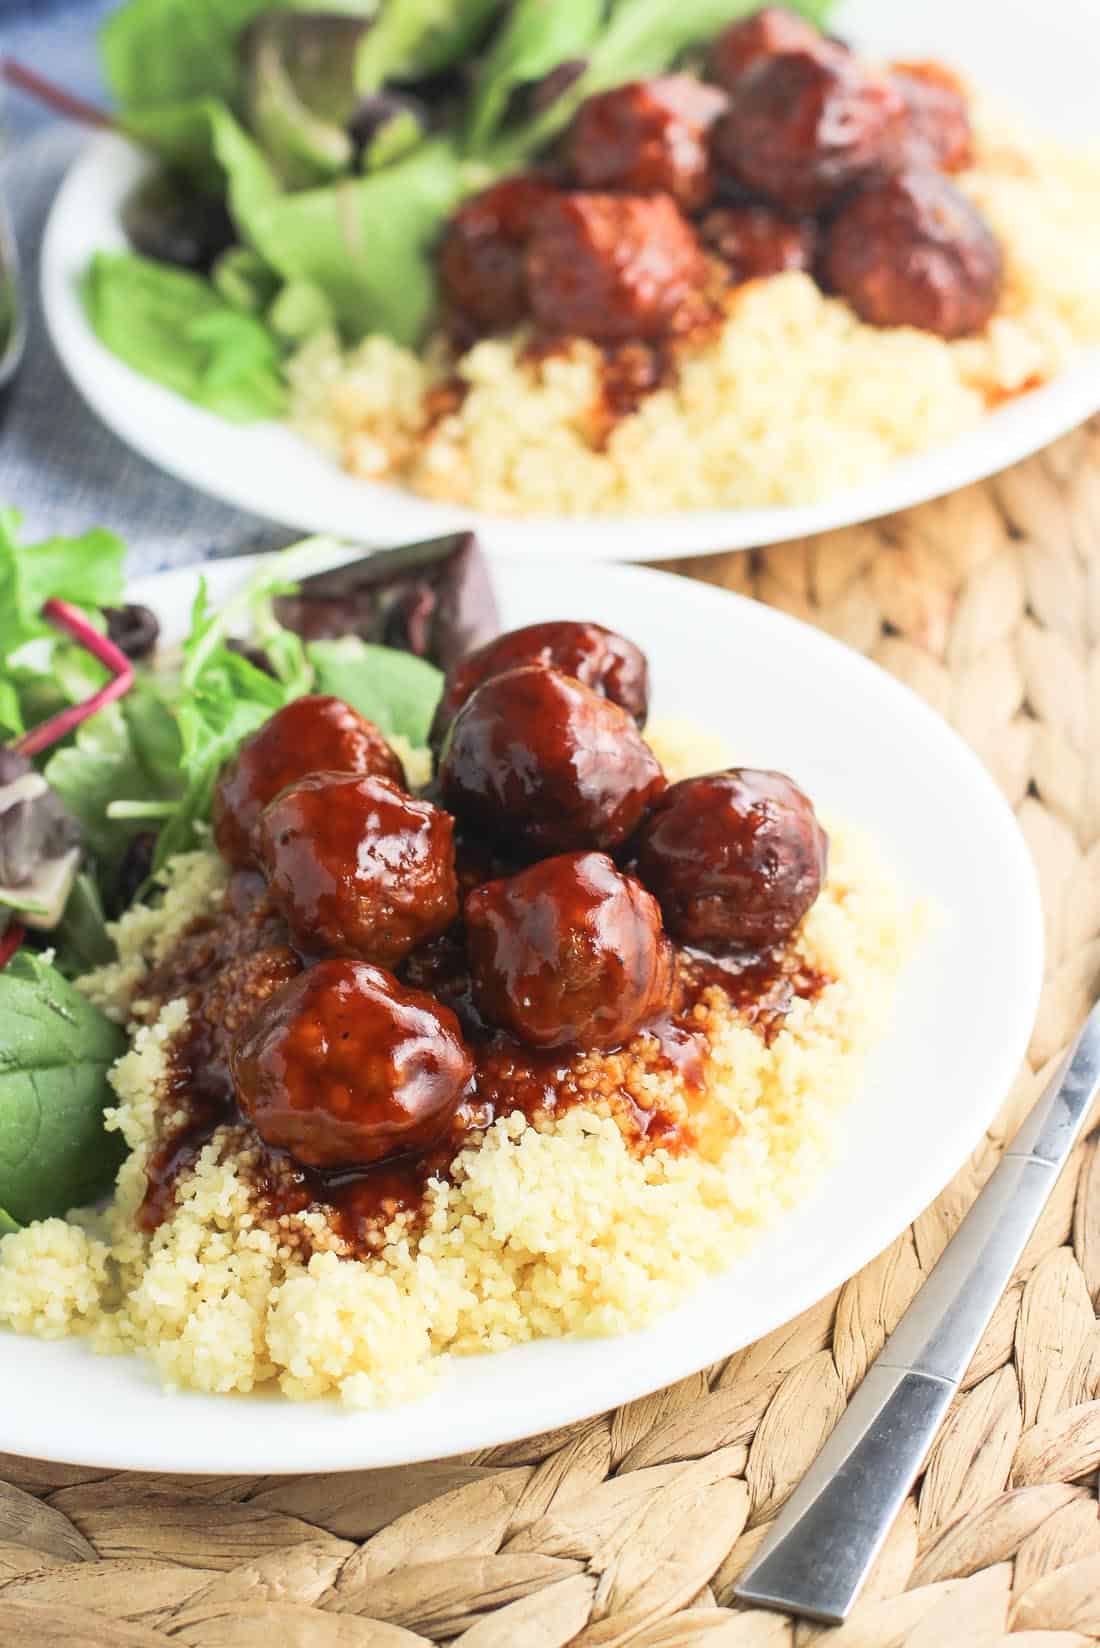 Two plates of salad and meatballs covered in sauce served over couscous.